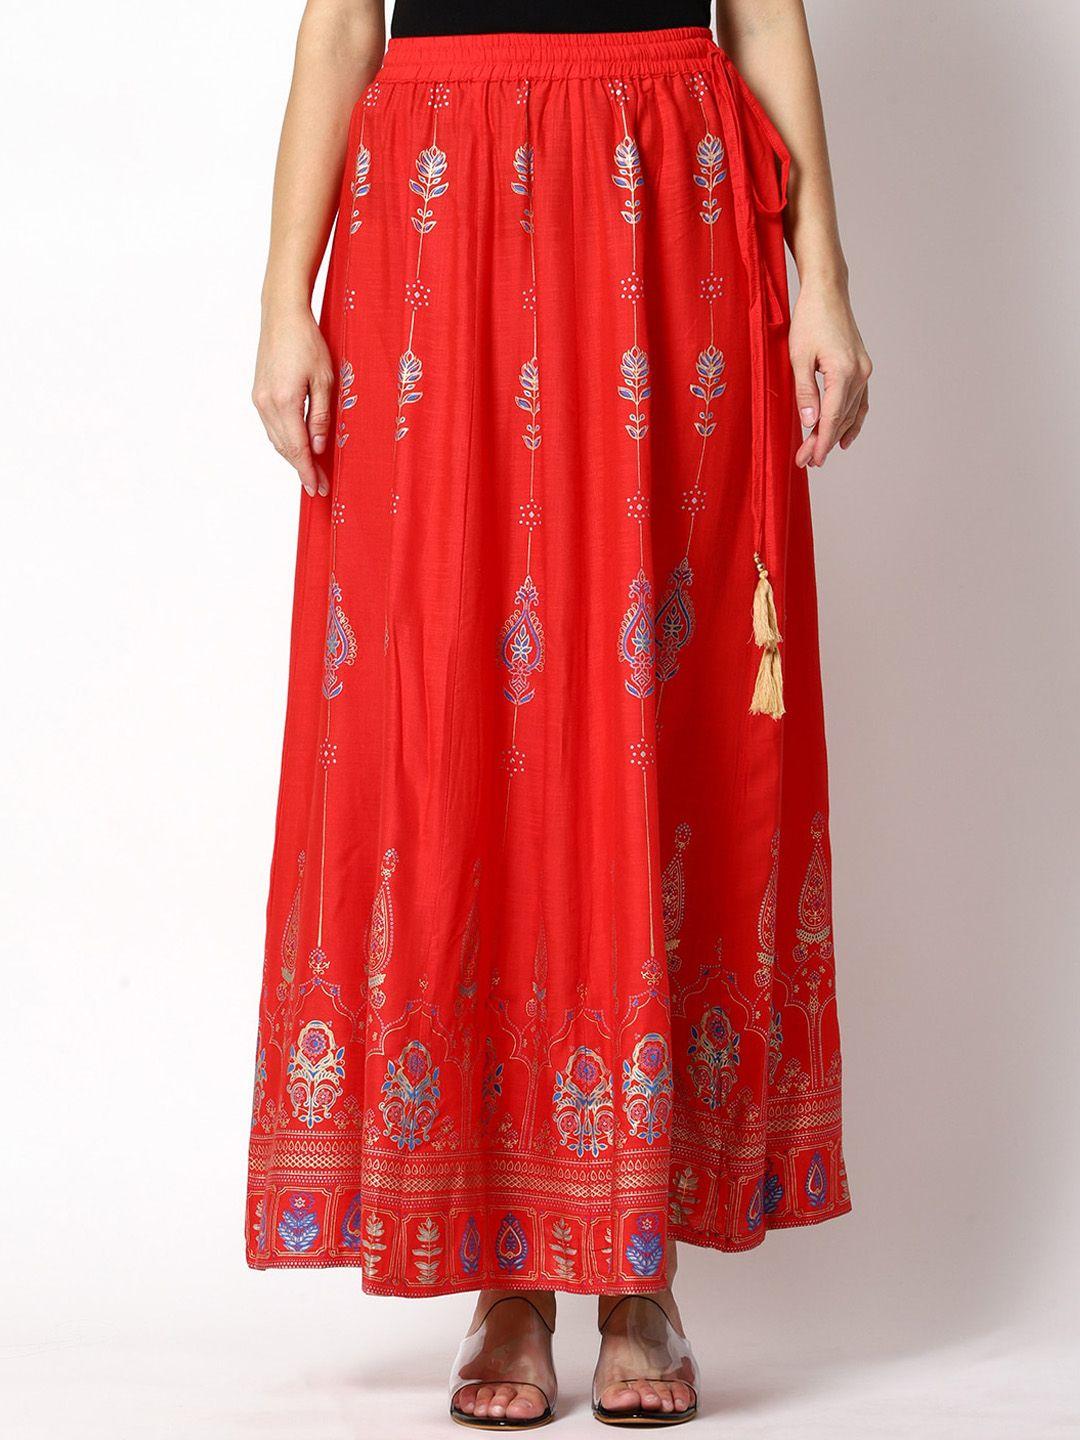 shereen-women-red-ethnic-printed-maxi-flared-skirts